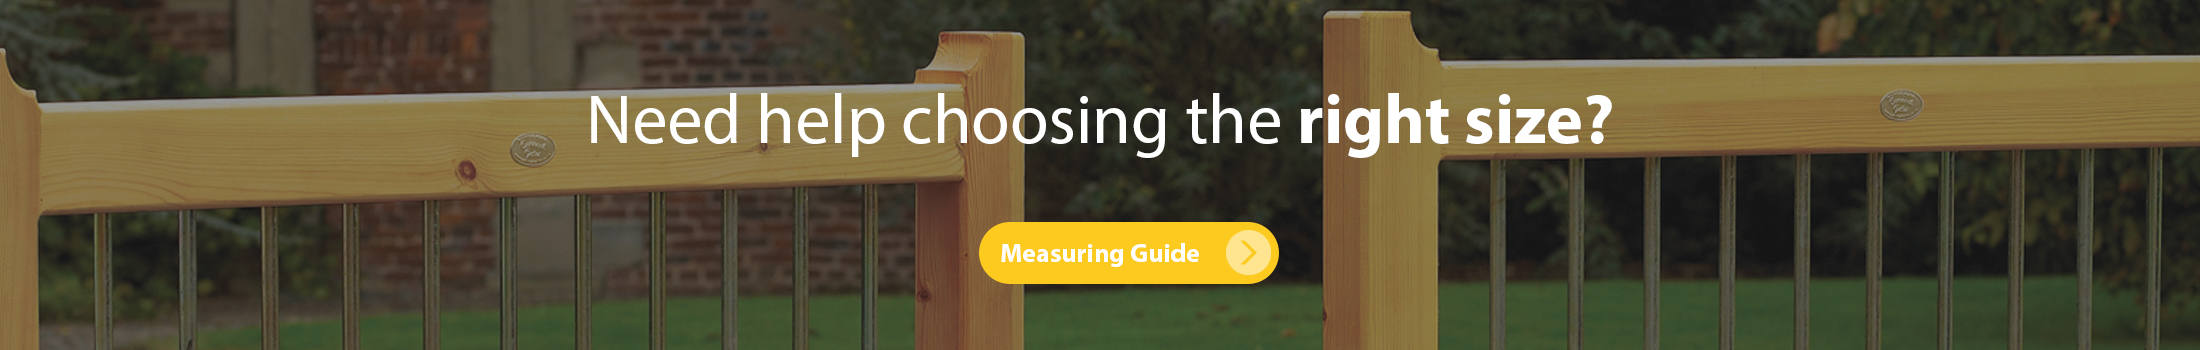 Read the measuring guide here if you need help with ordering sizes